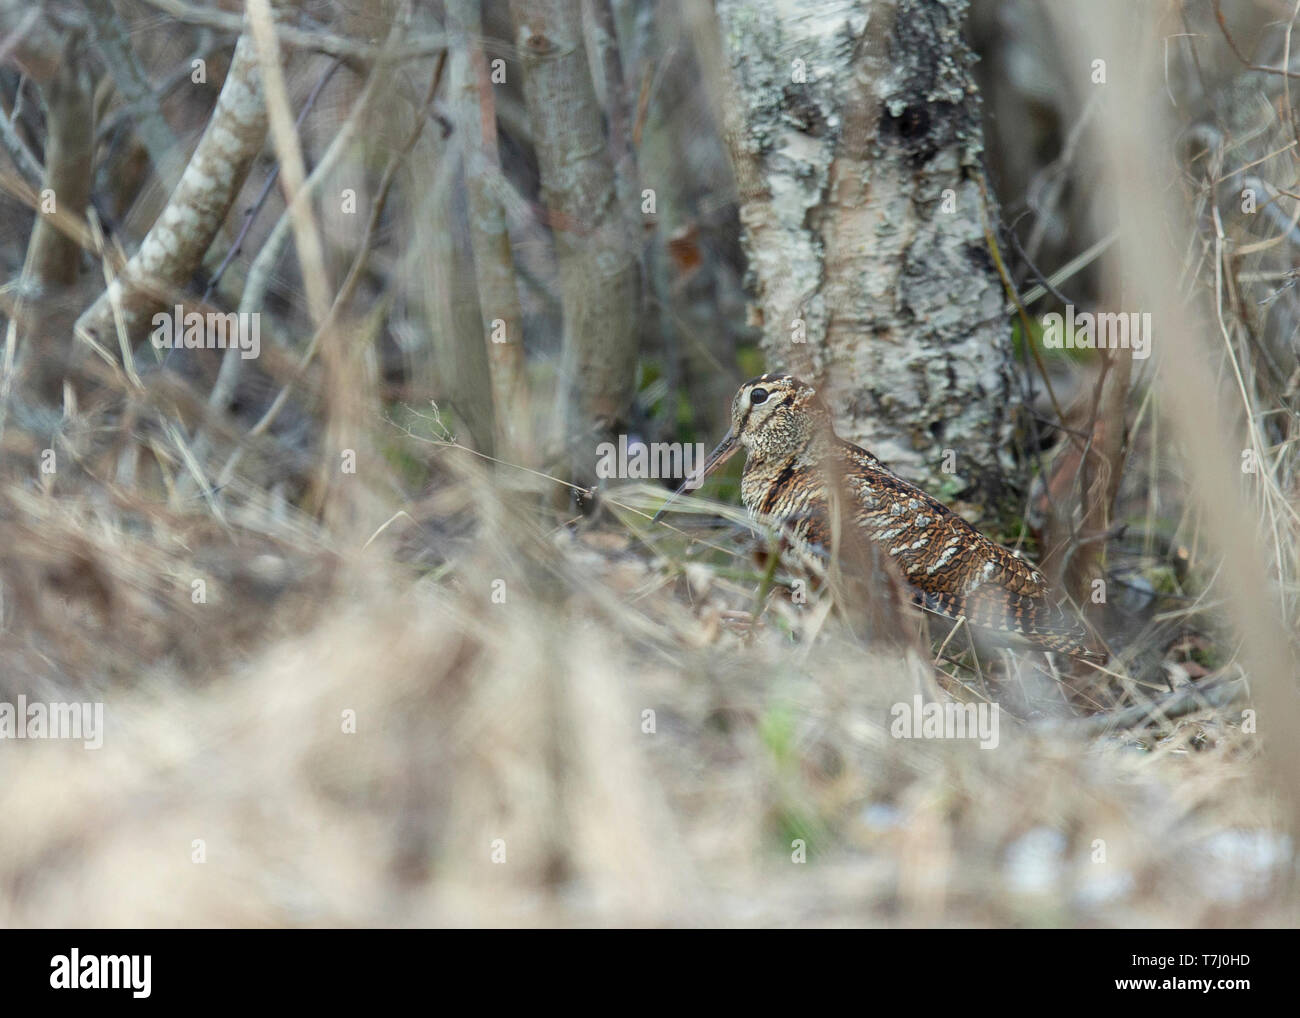 Eurasian Woodcock (Scolopax rusticola) skulking on the ground in a dense Finnish forest. Stock Photo